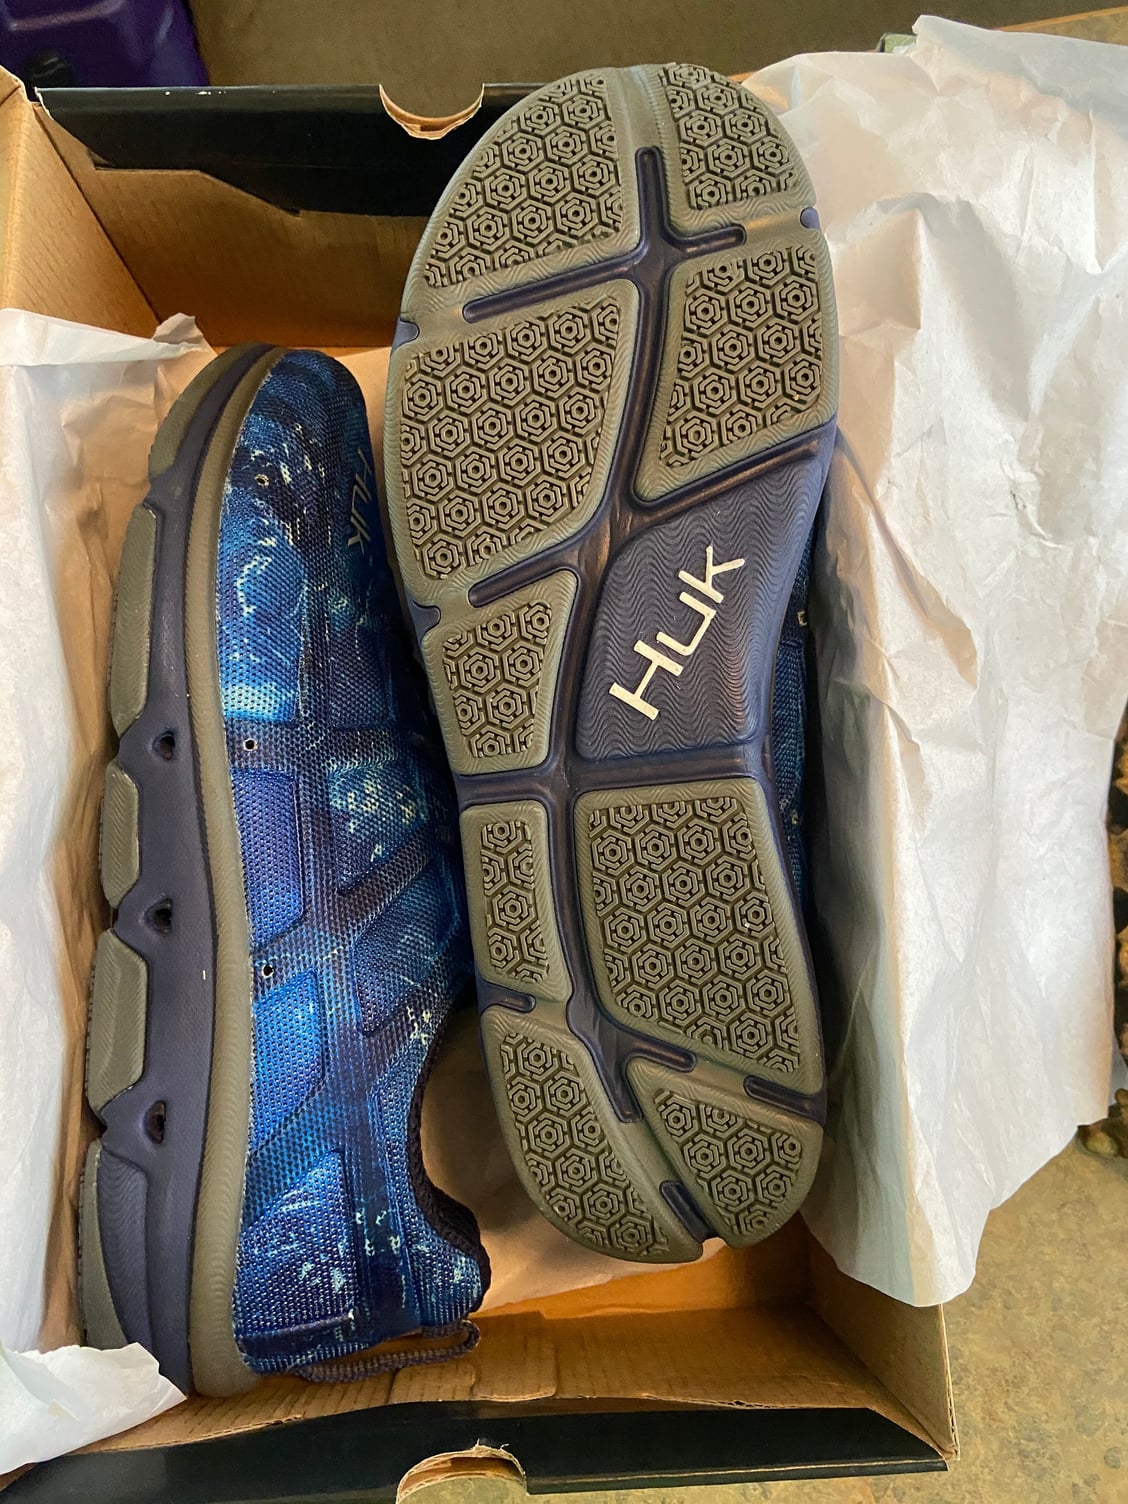 NEW HUK Fishing Shoes - The Hull Truth - Boating and Fishing Forum